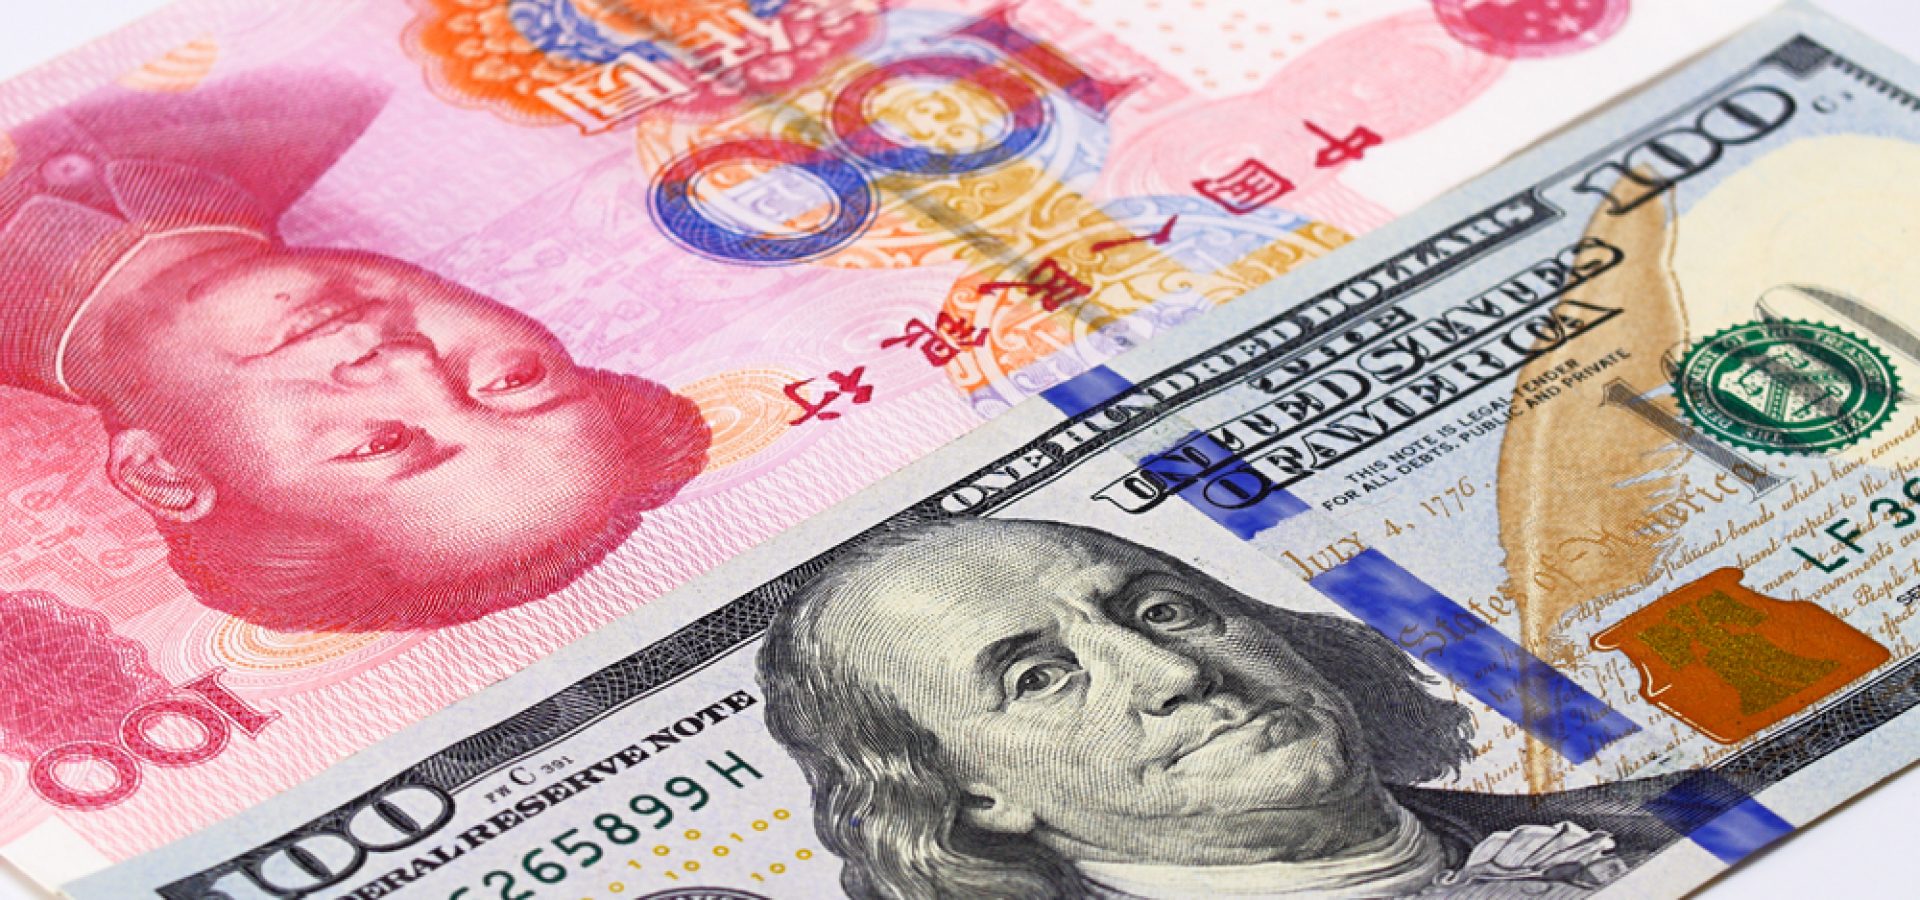 Wibest – USD to Chinese Yuan: Chinese yuan and US dollar bills.